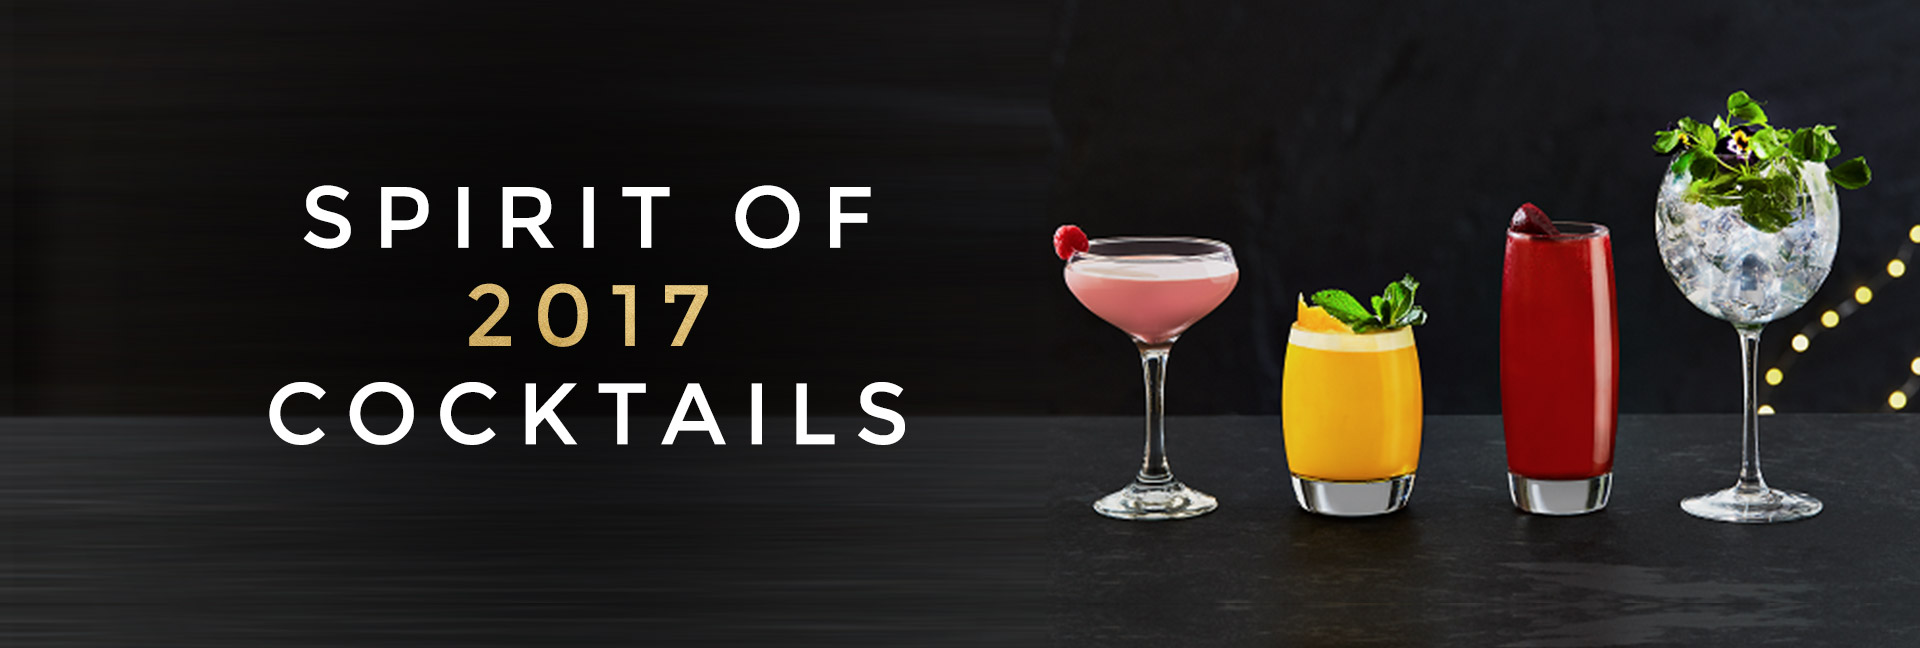 Spirit of 2017 cocktails at All Bar One Oxford